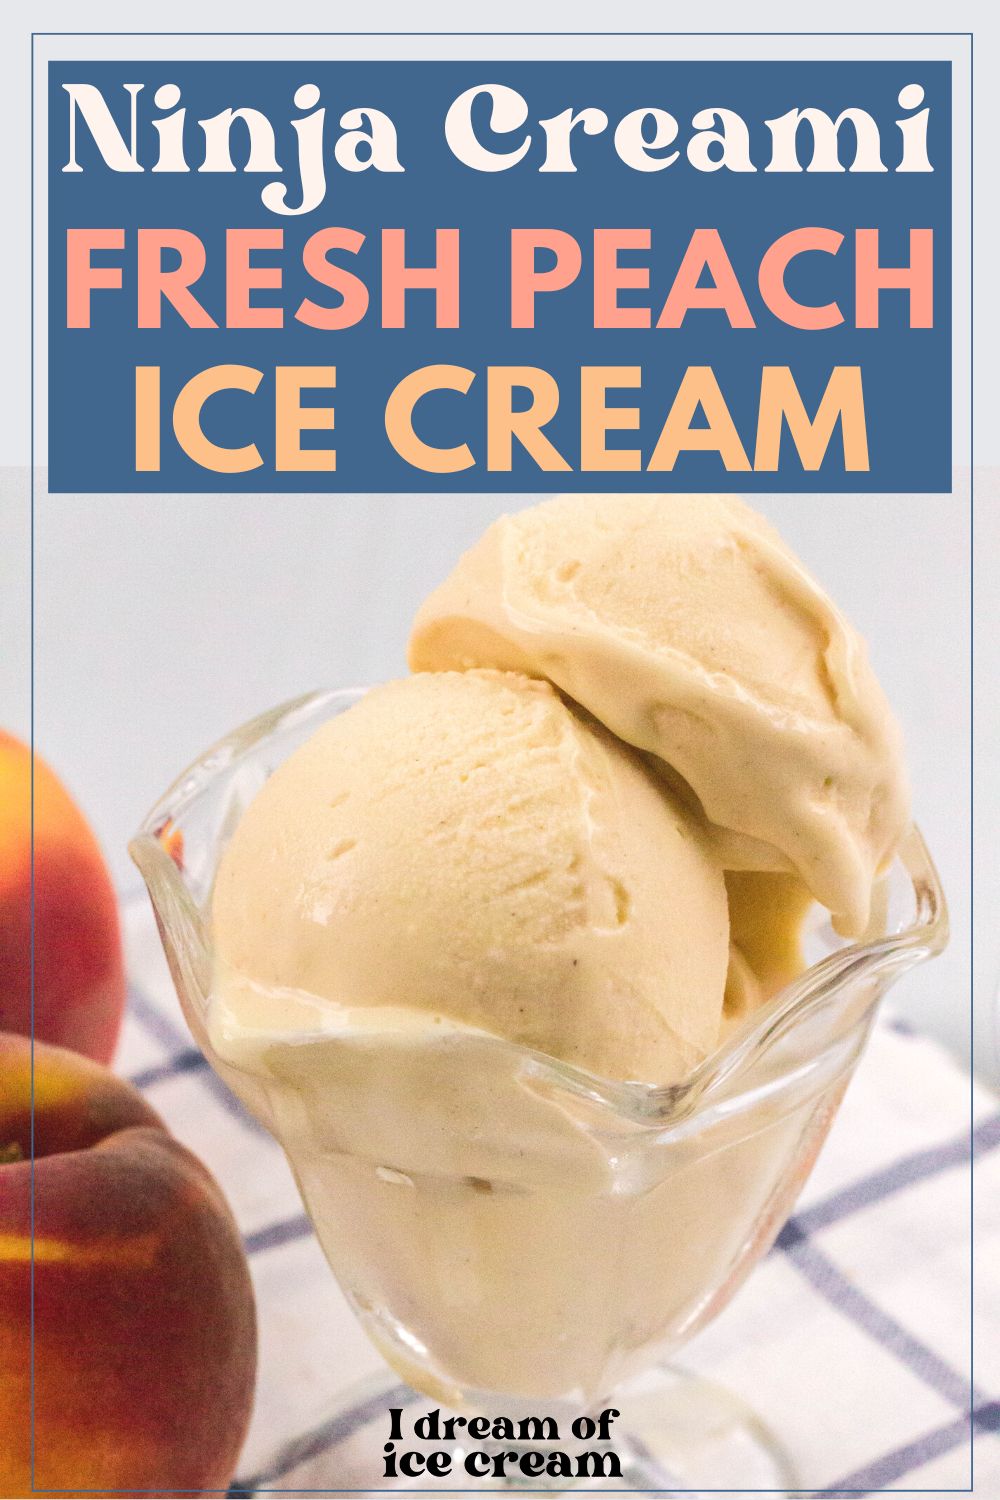 Scoops of Ninja Creami peach ice cream served in a glass dish, with fresh peaches next to it.